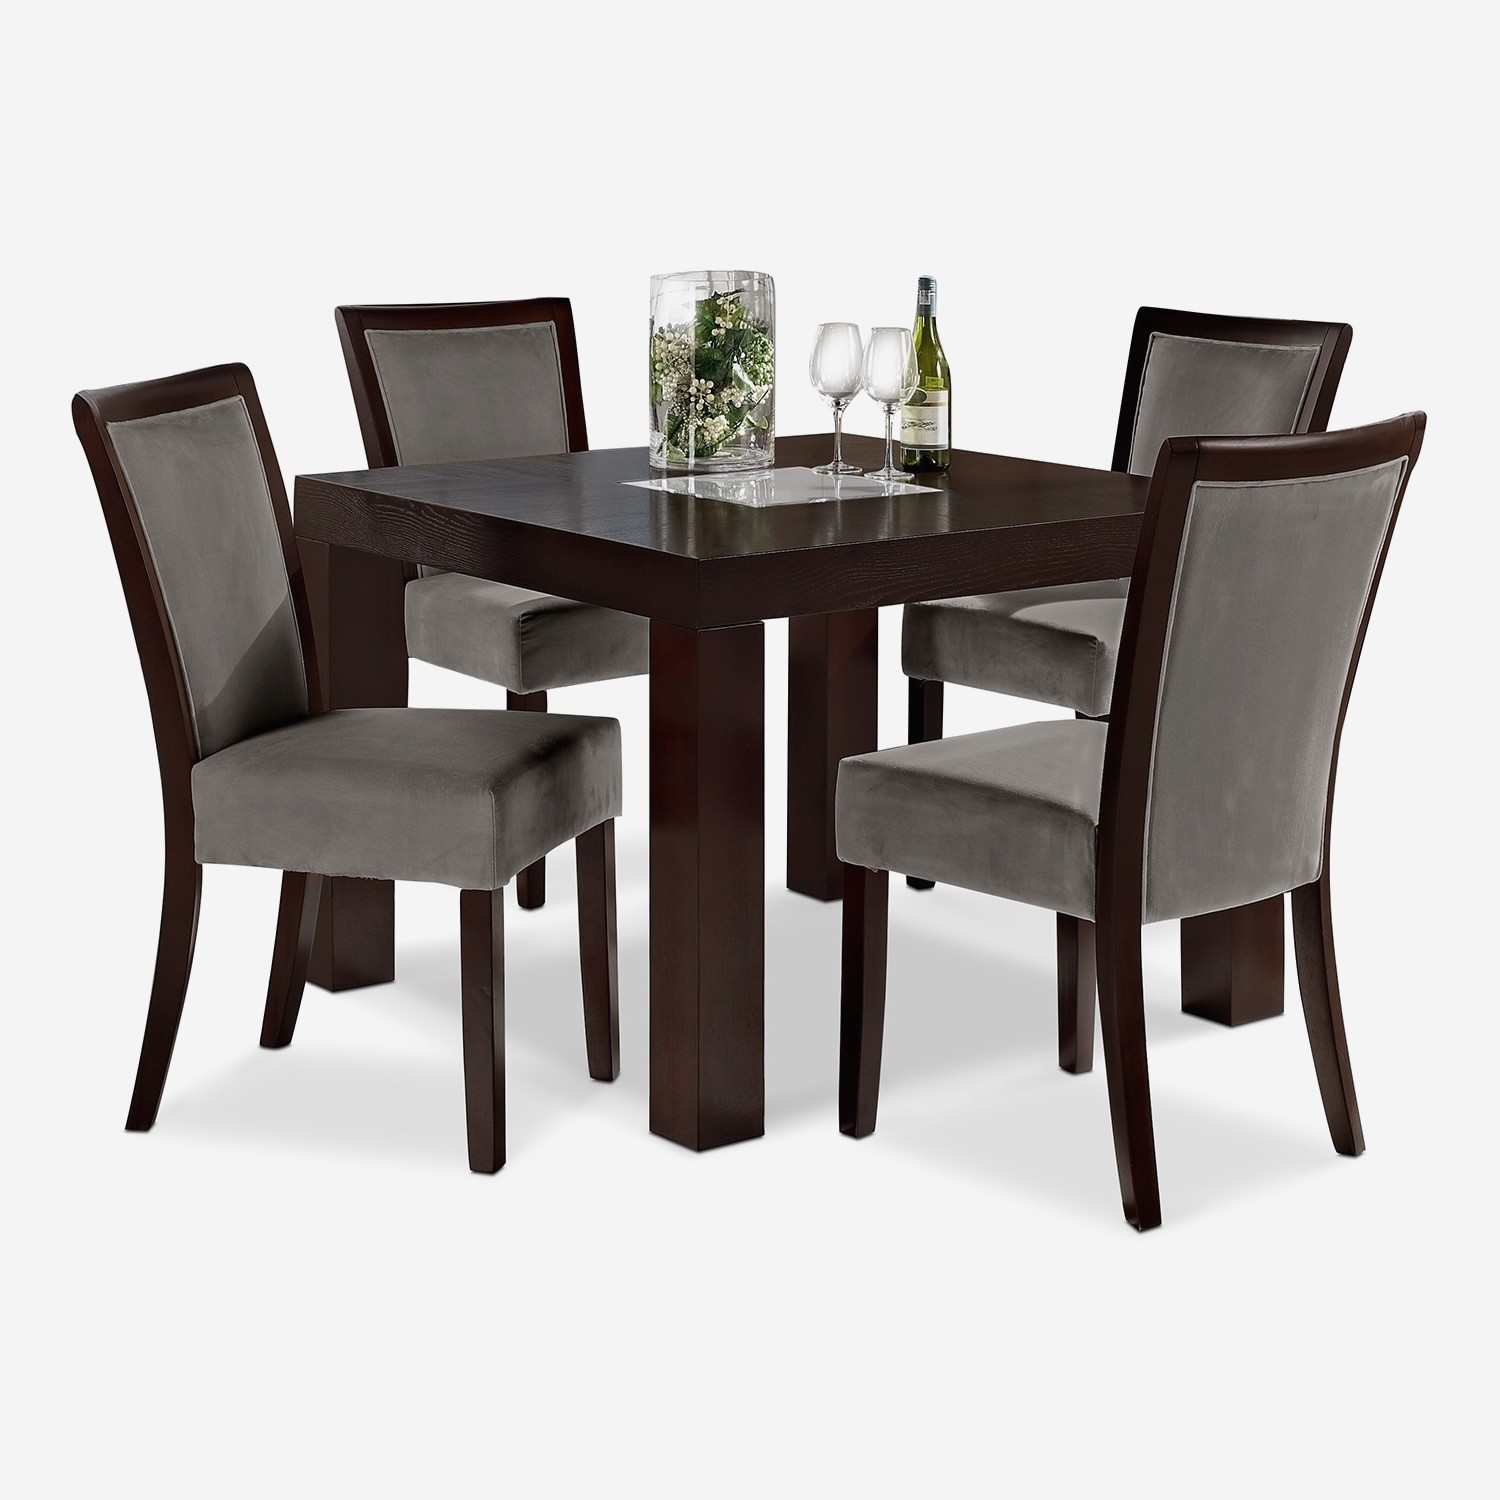 Cheap Dinner Tables
 Cheap Dining Table Sets Under 100